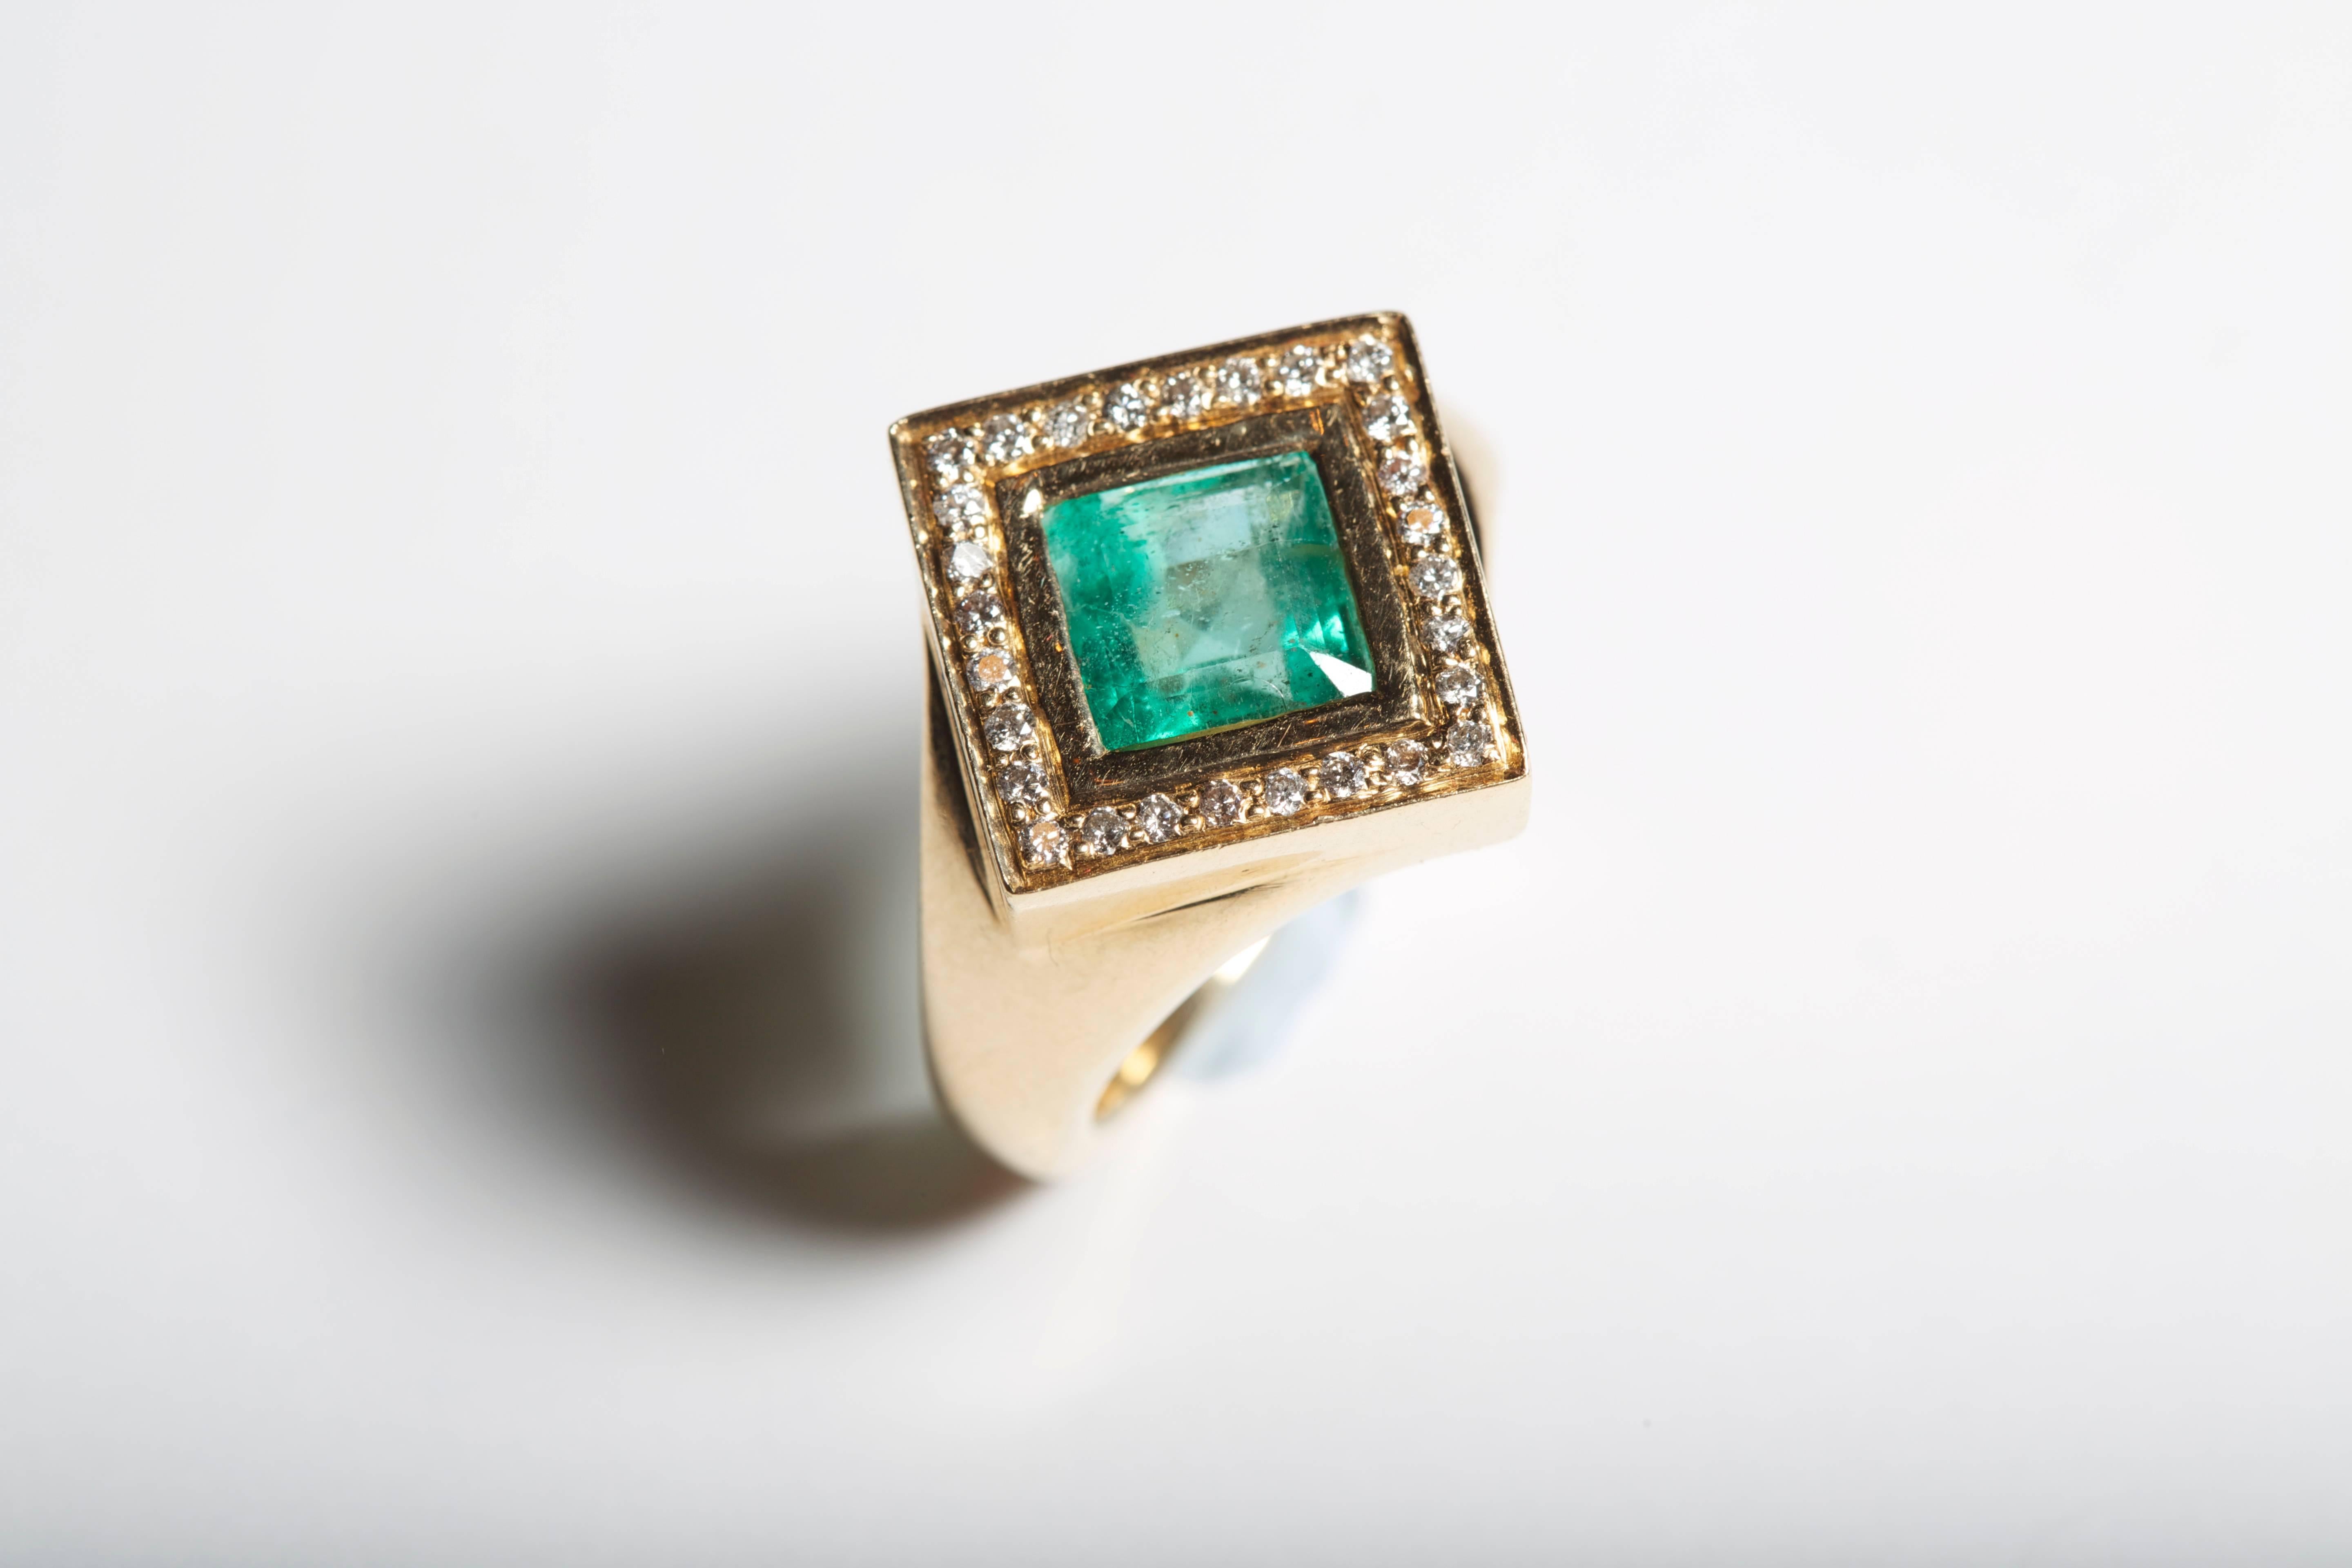 The elegant Emerald and Diamond Kite Ring is perfect for the lady who loves sophistication. Stylish for any occasion, this ring is from the Sacred Shapes collection.